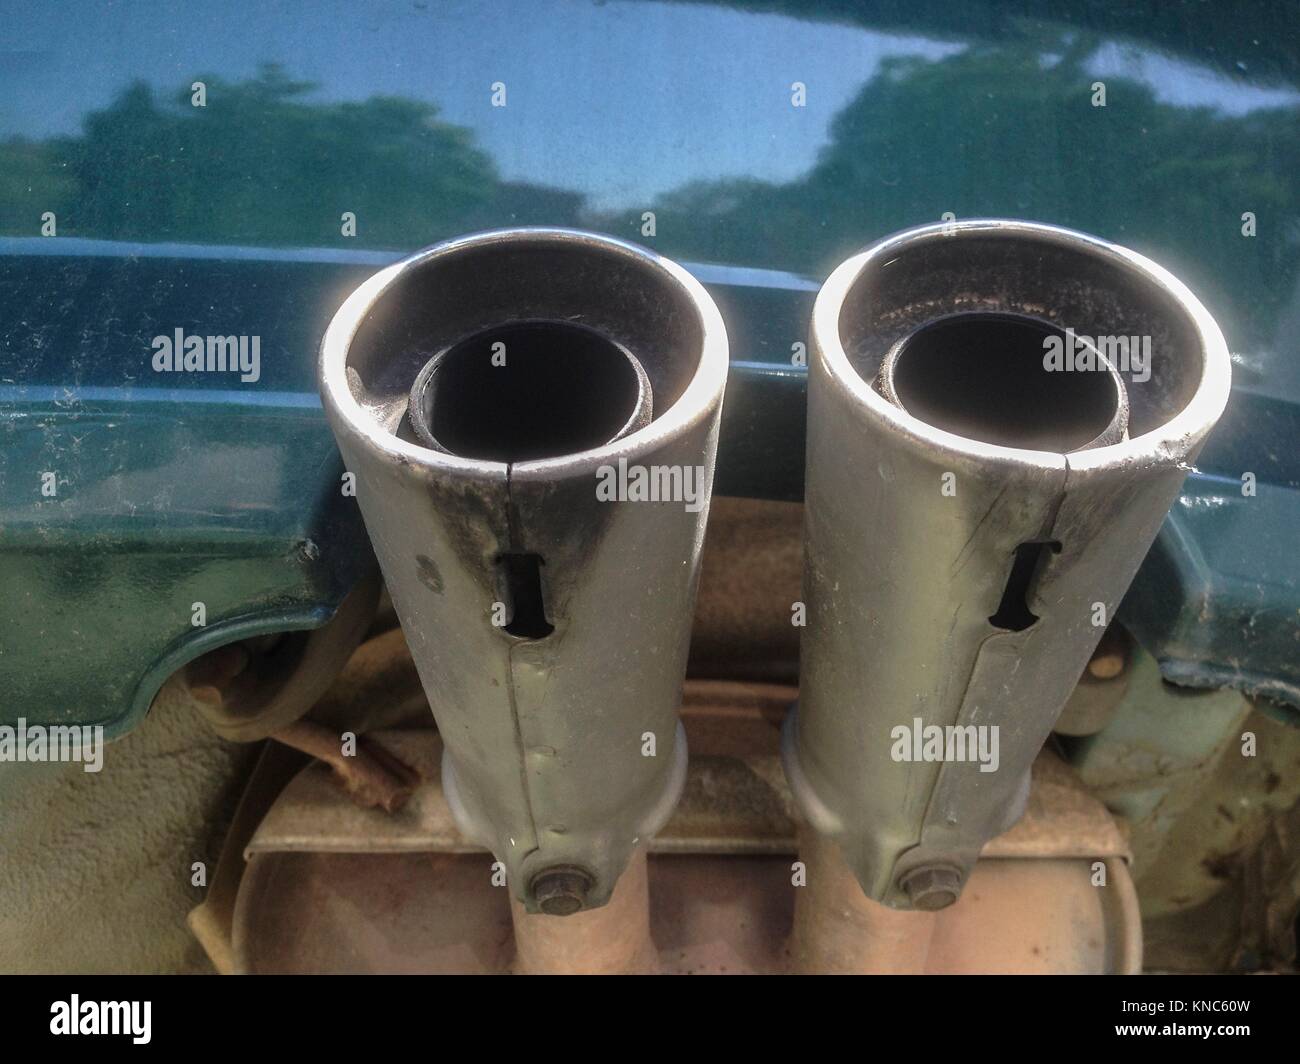 Double exhaust pipes from a car. Underside view. Stock Photo